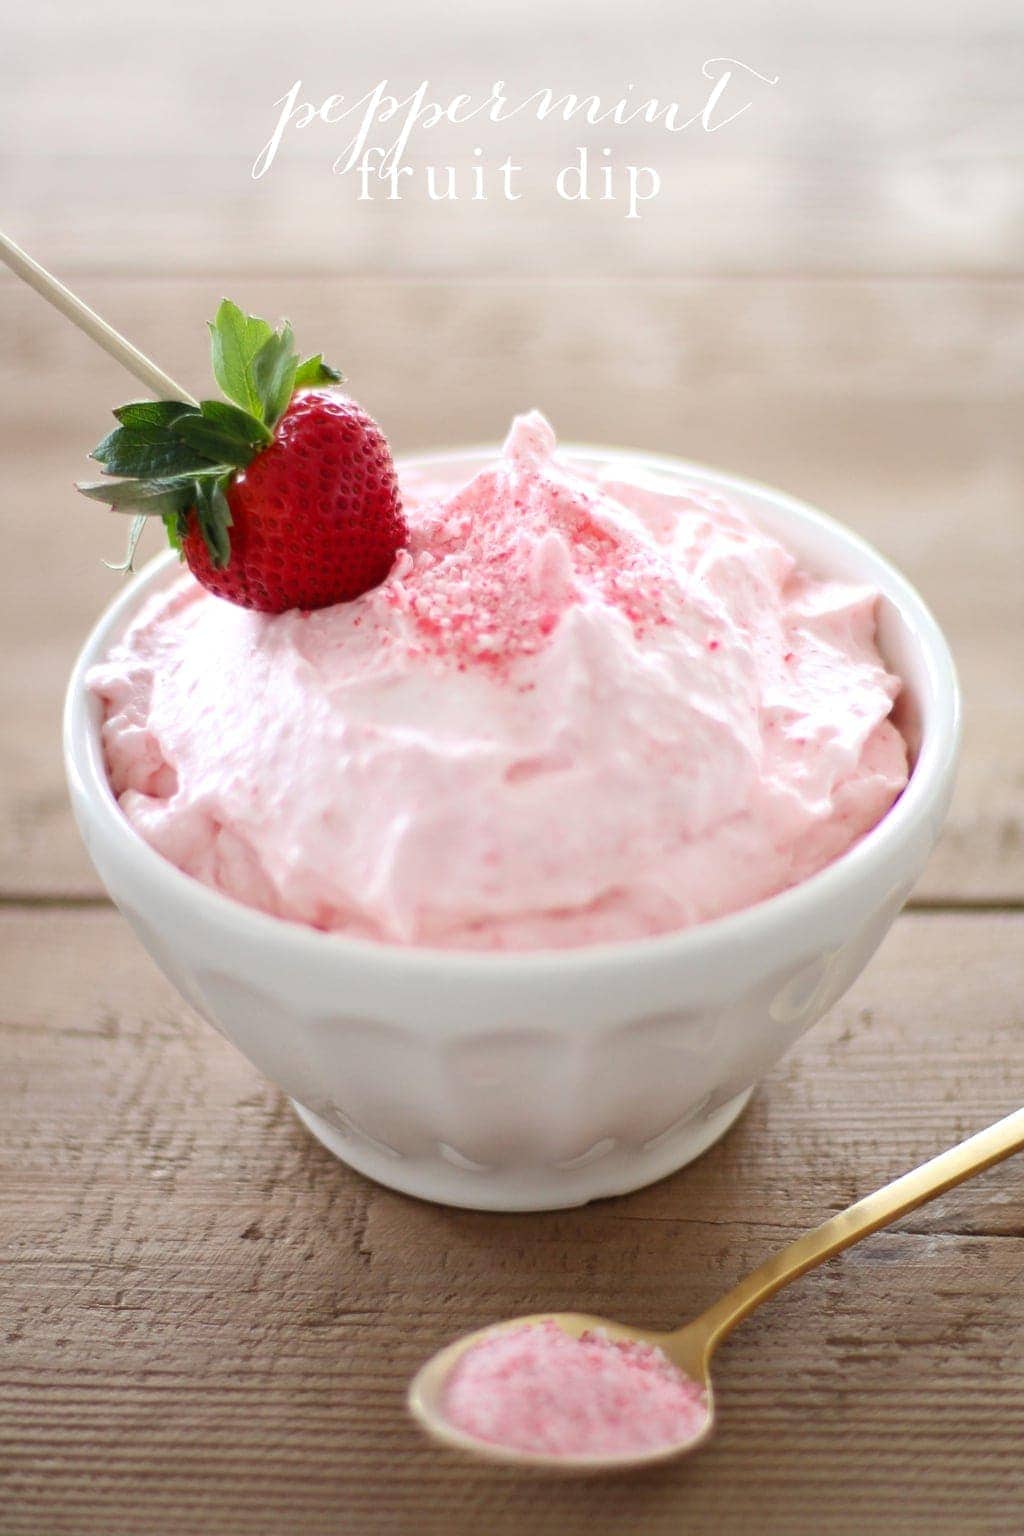 Peppermint fruit dip served in a white bowl with text overlay